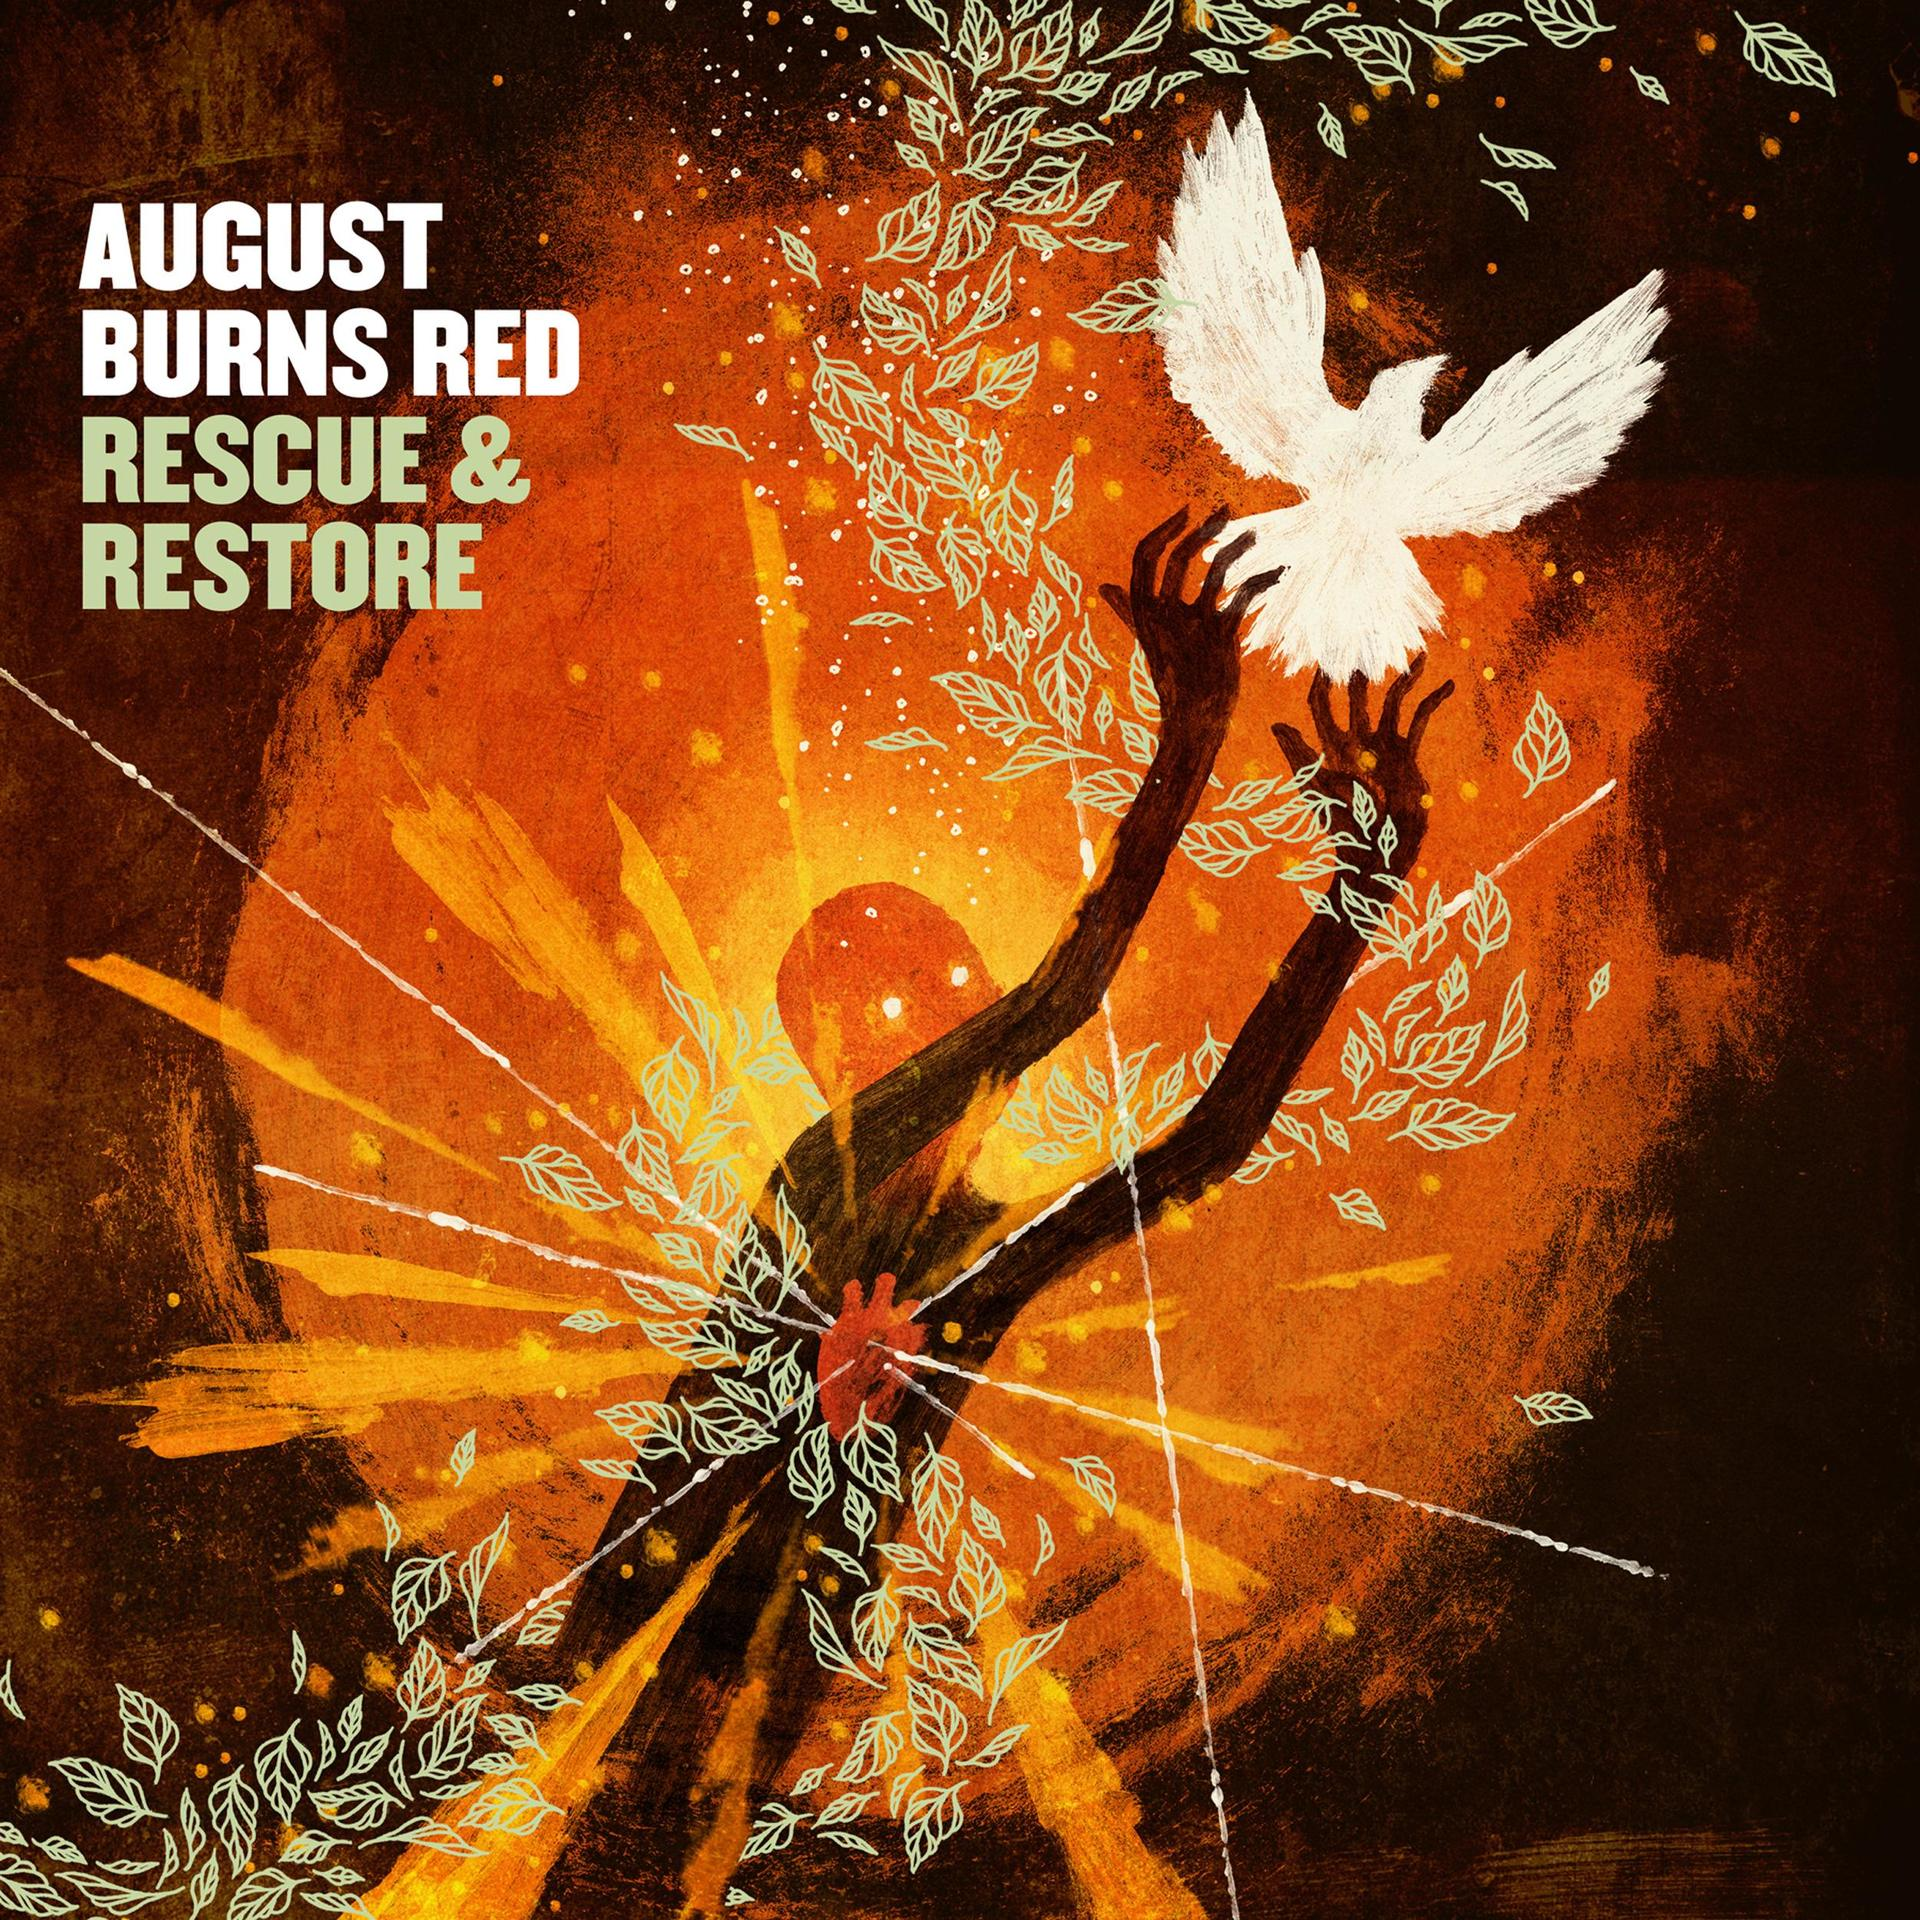 August Burns - Red - RESCUE RESTORE And (Vinyl)